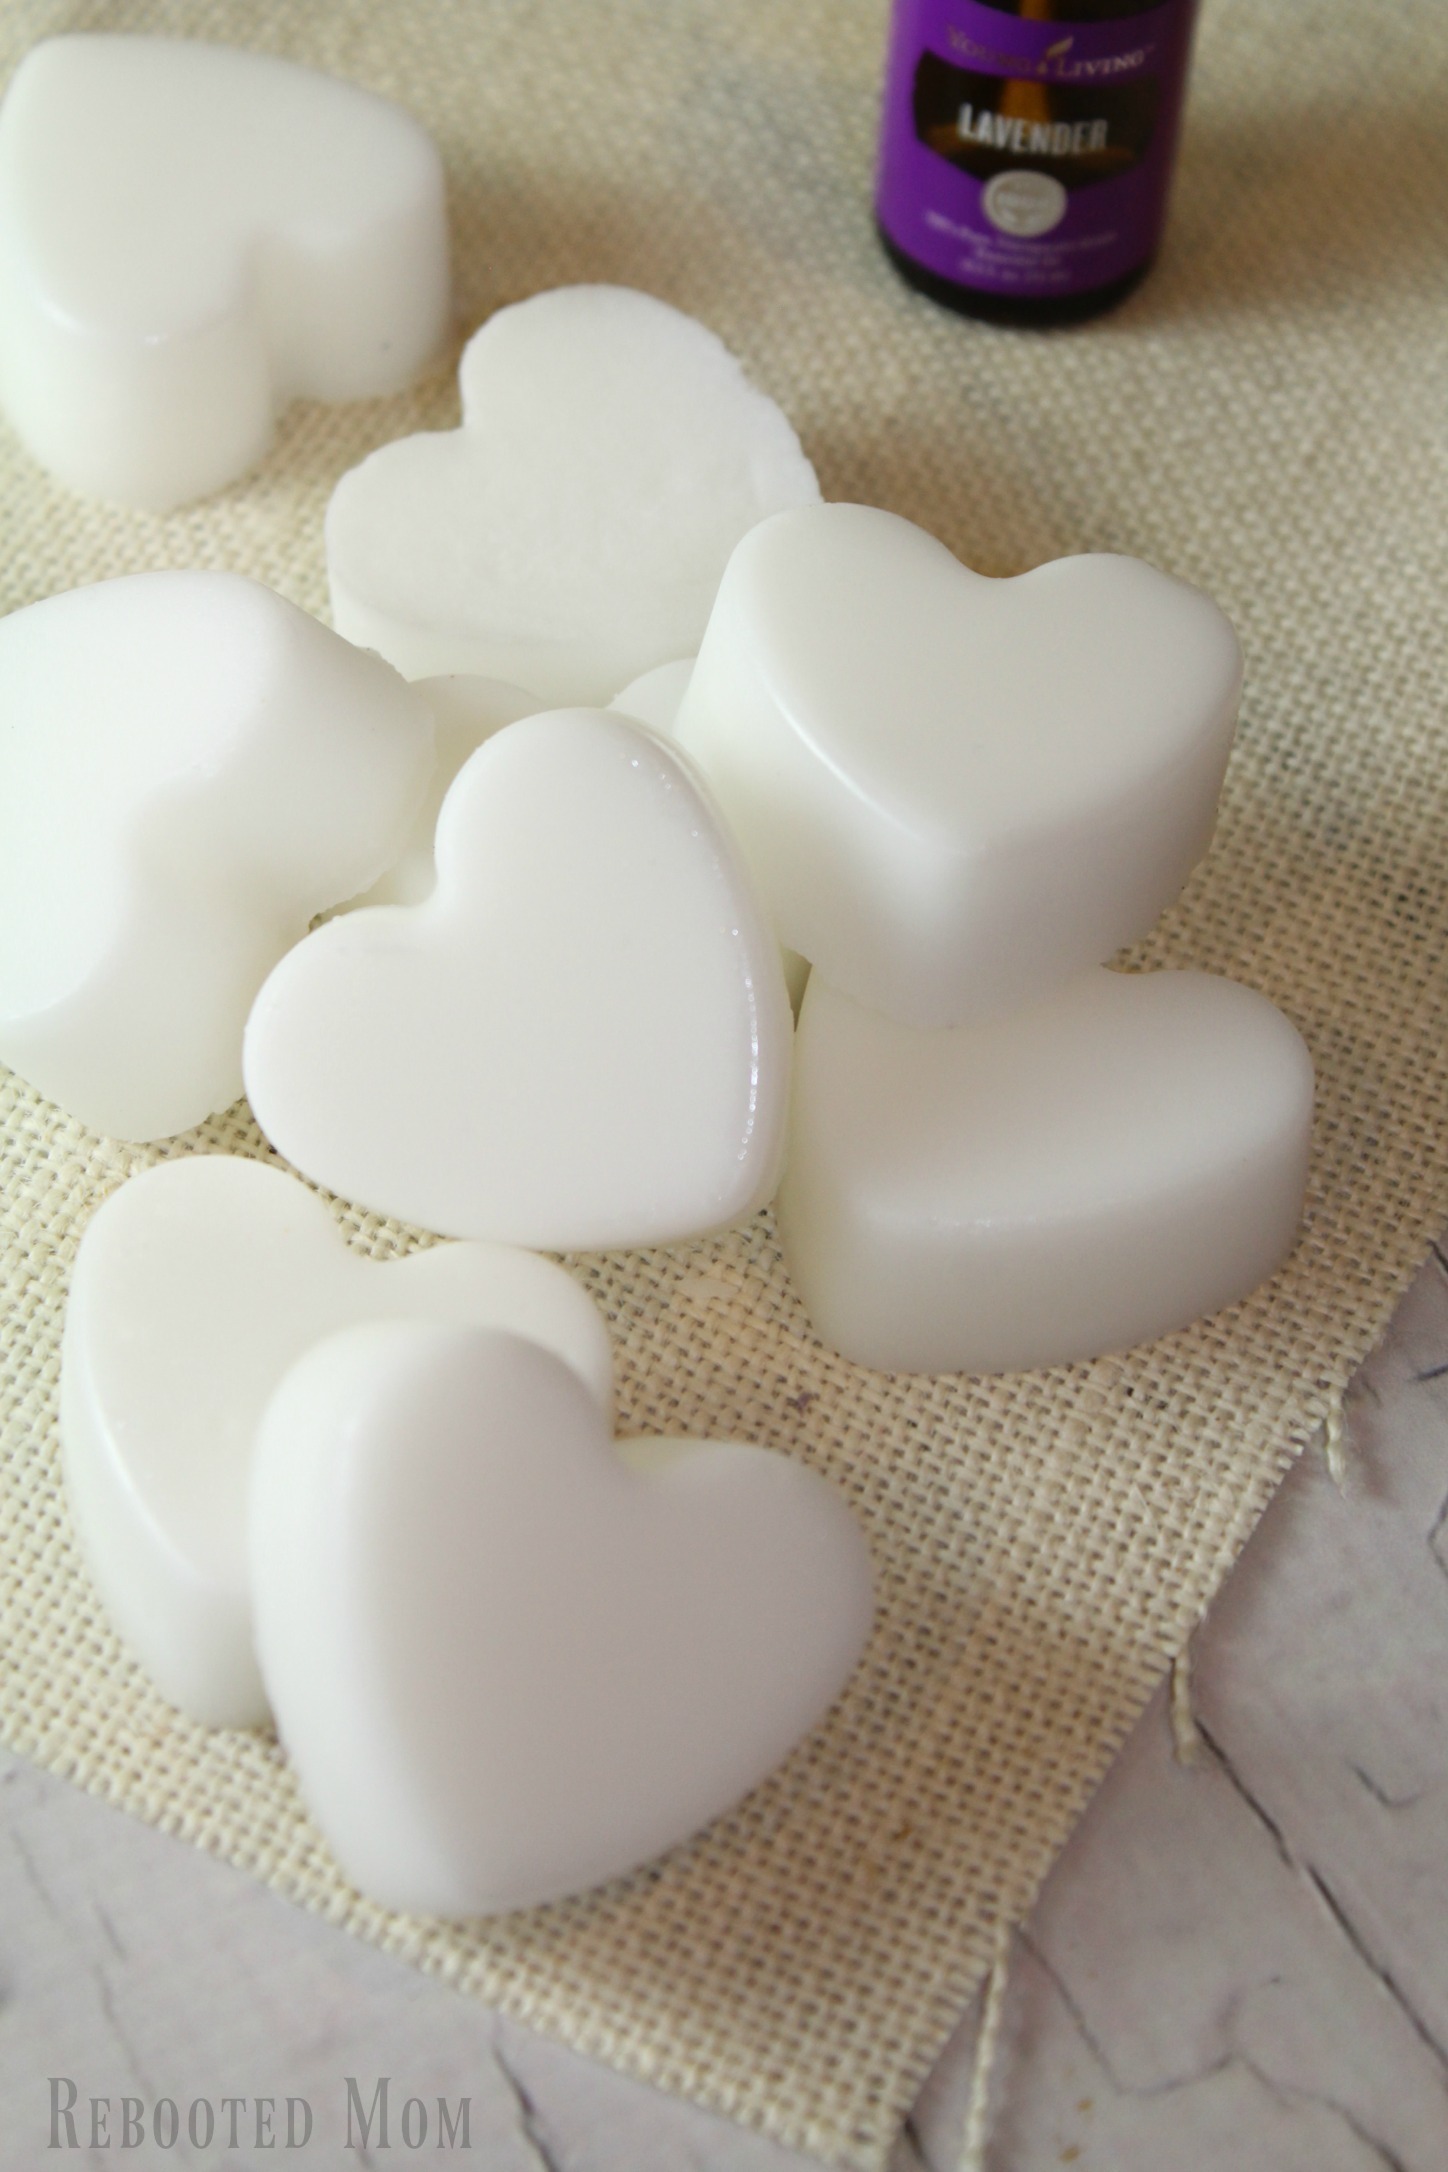 These Lavender Coconut Oil Bath Melts are an easy, and inexpensive way to moisturize dry skin.